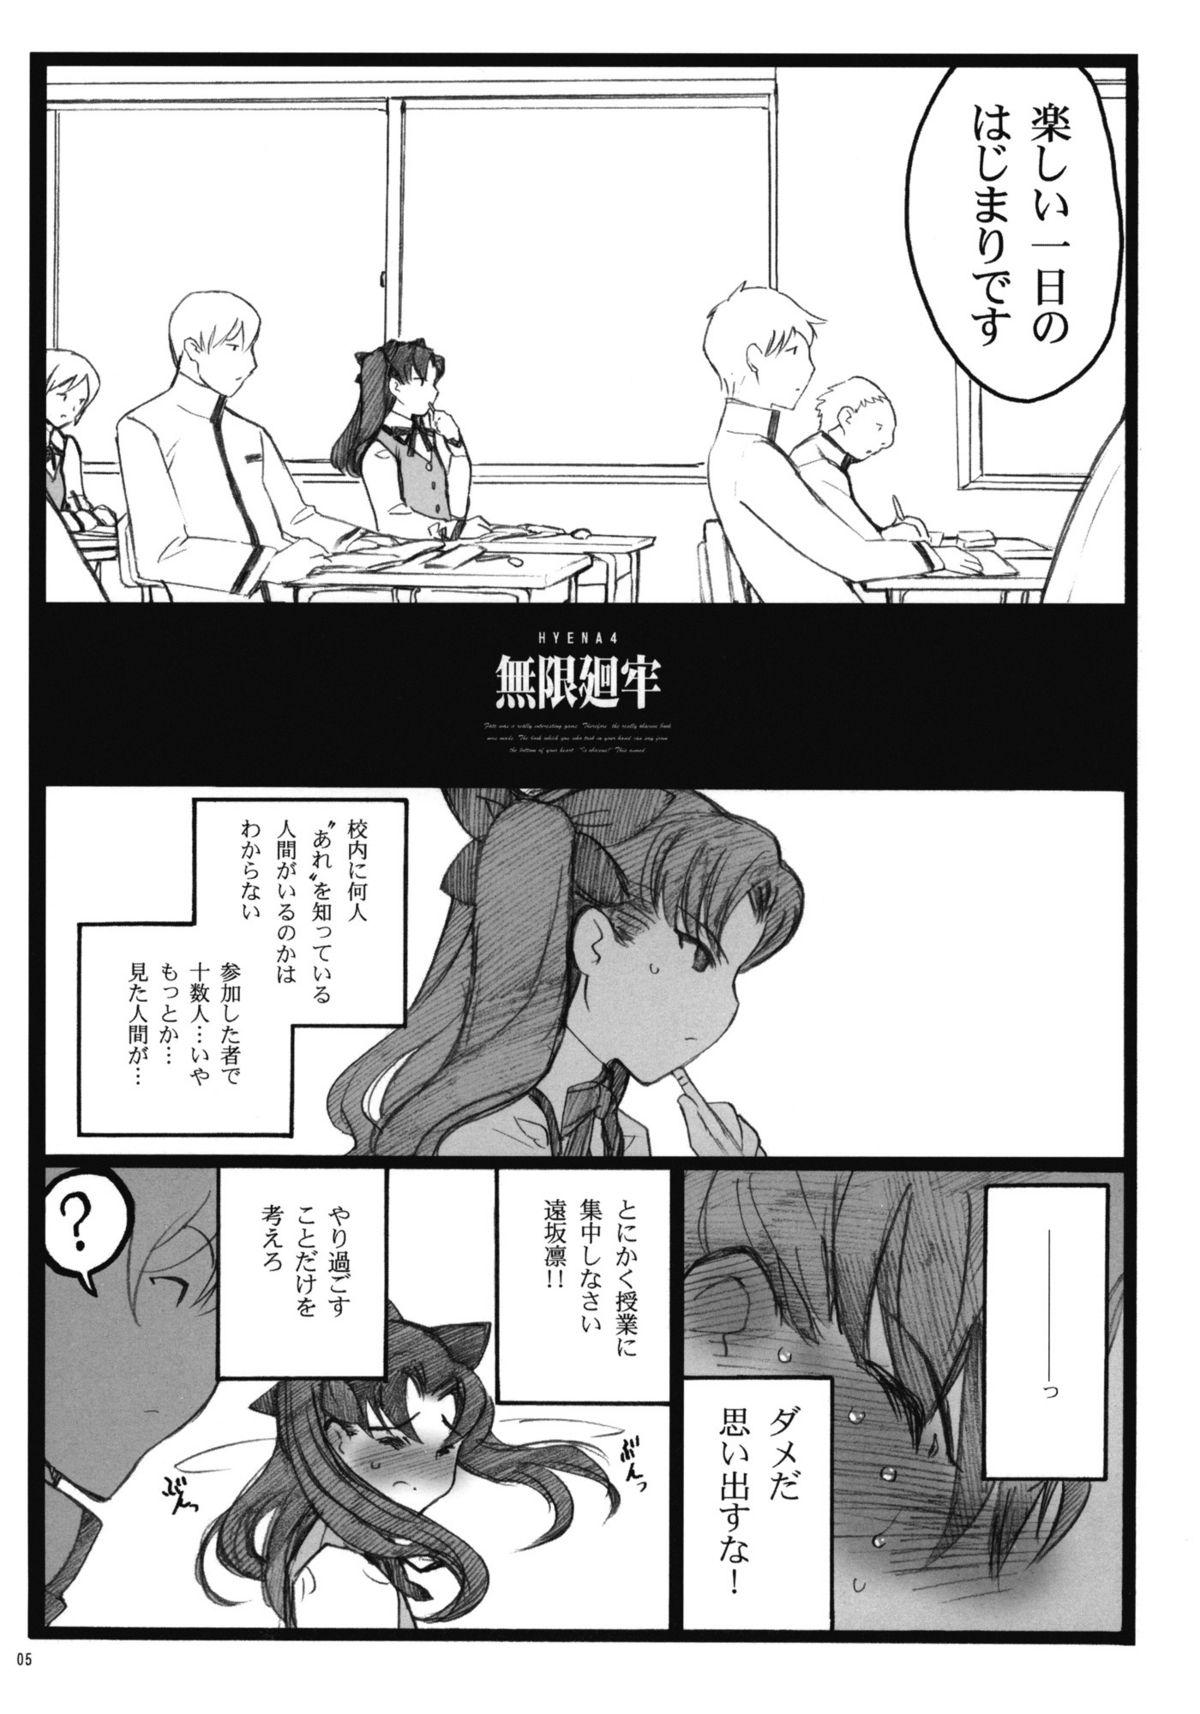 Matures Walpurgisnacht 4 - Fate stay night Blowjobs - Page 4